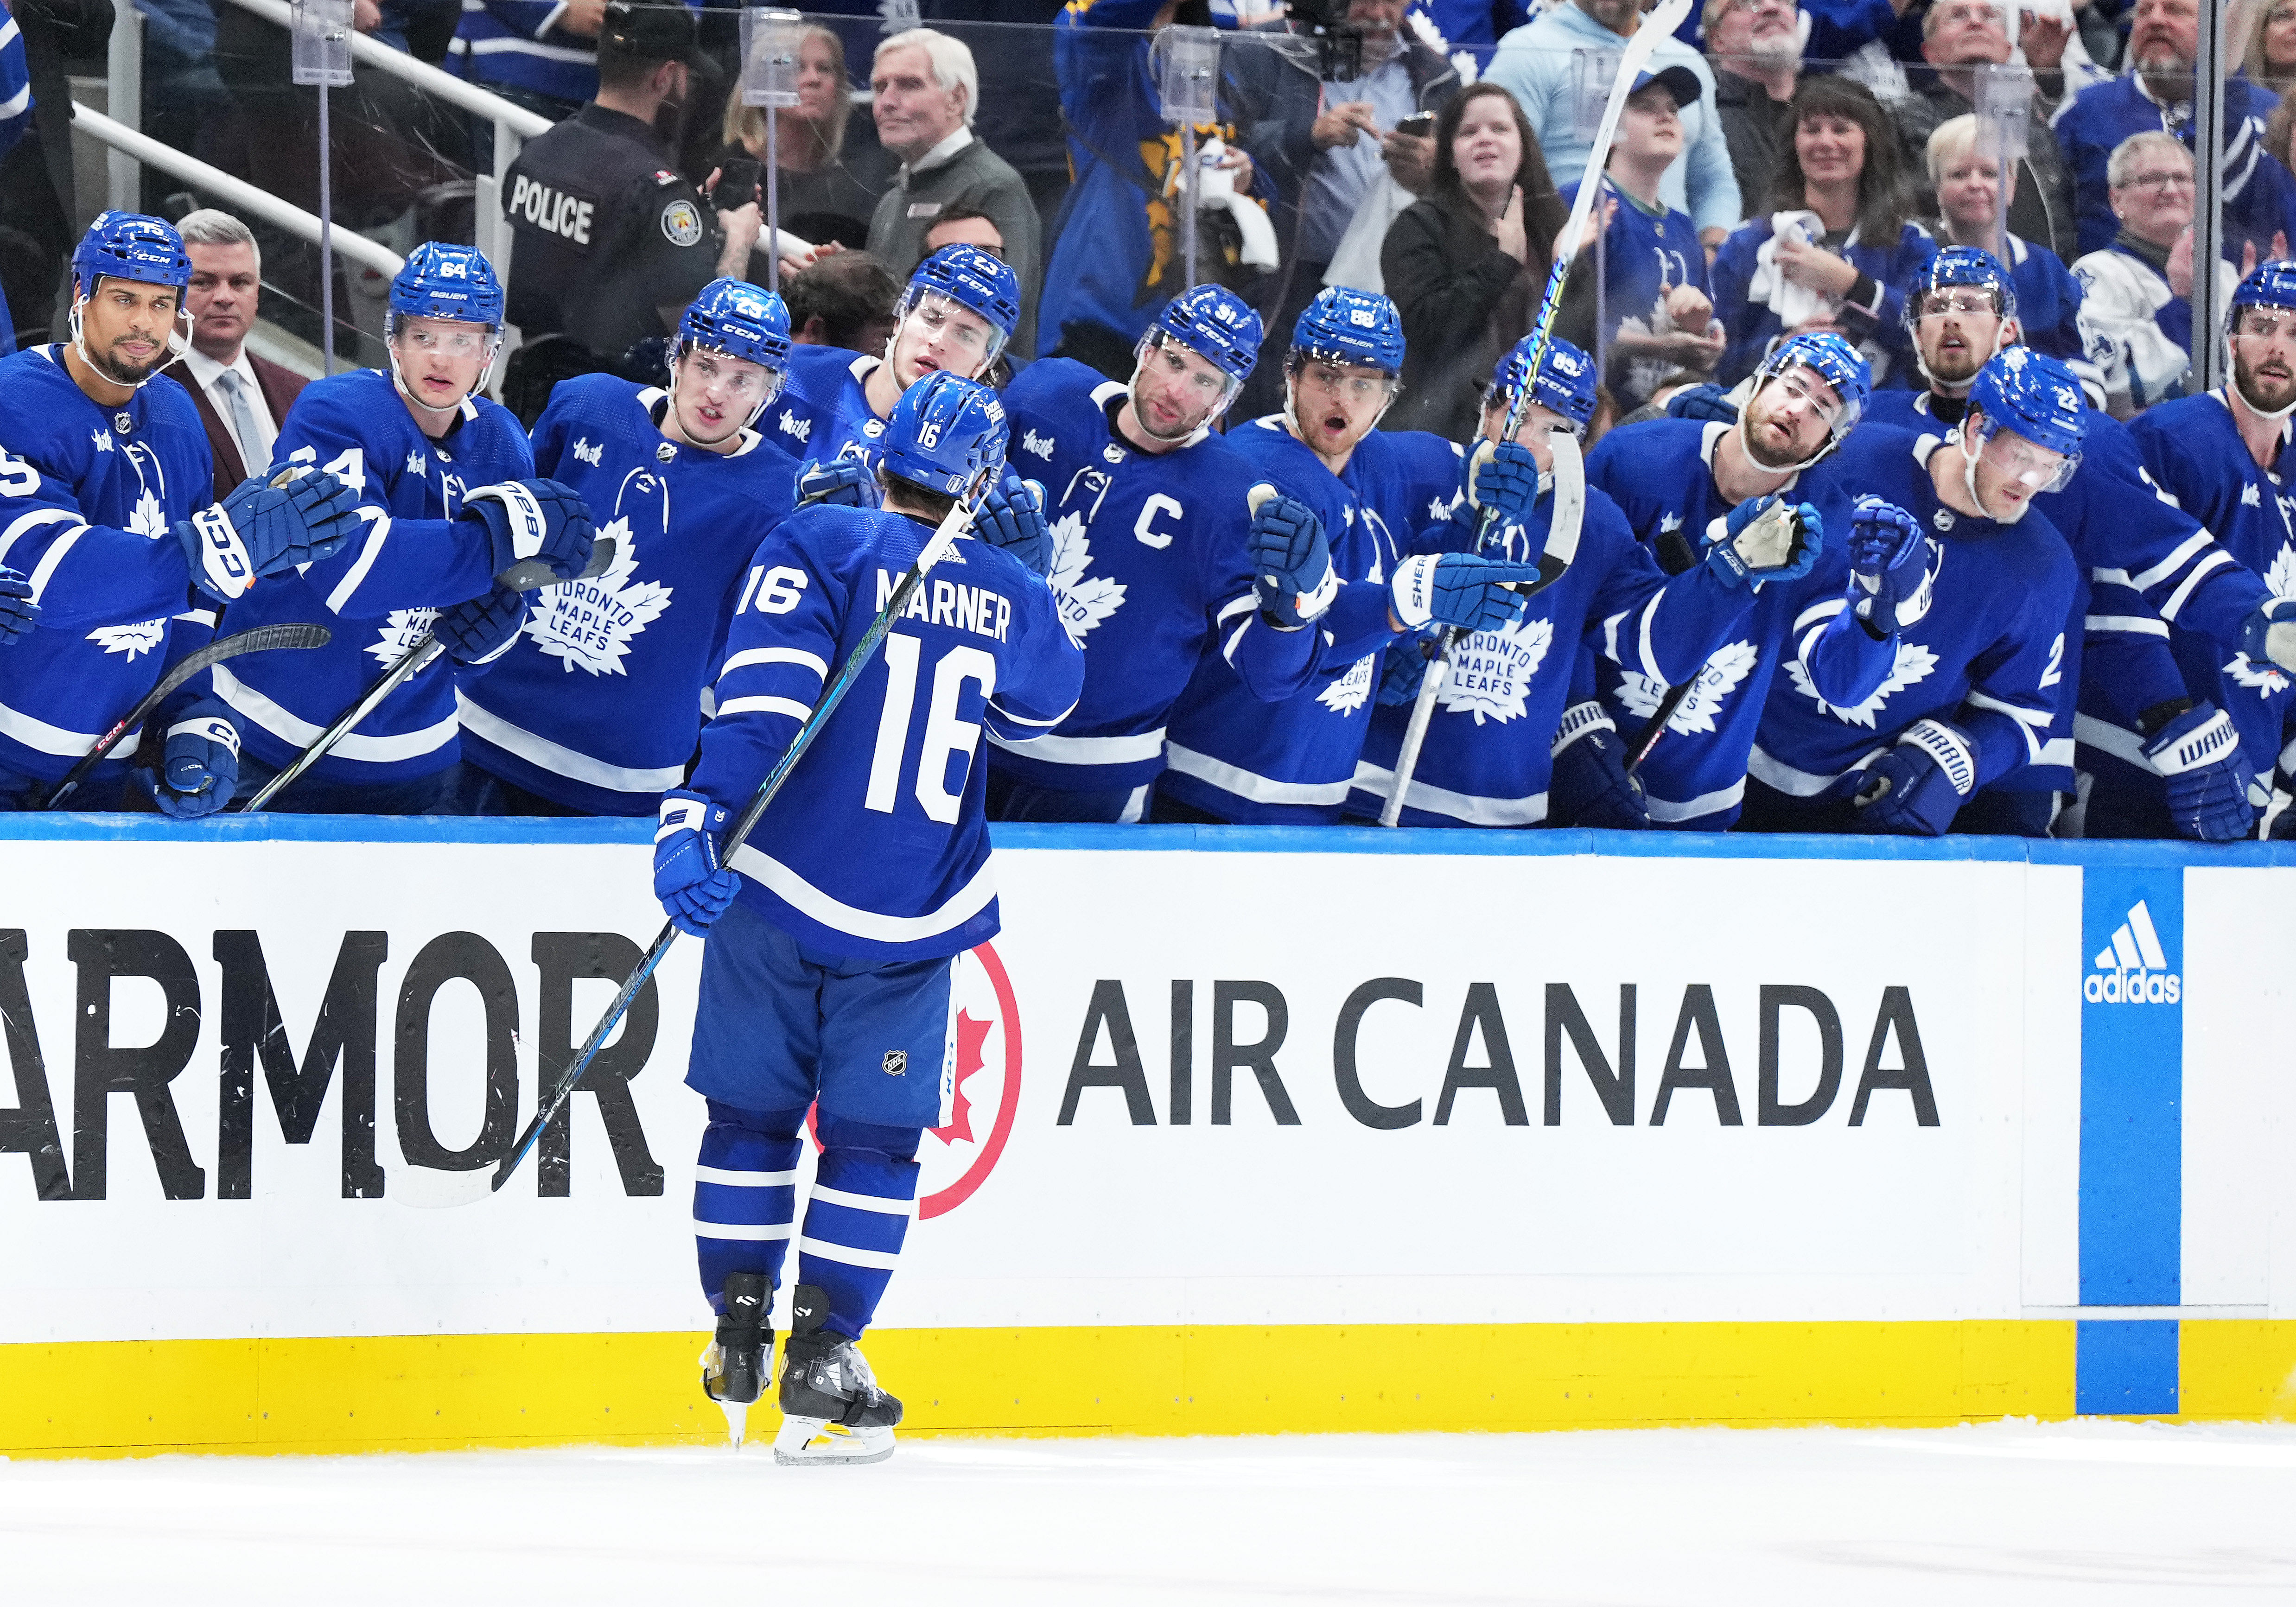 Toronto 3 reasons why the Maple Leafs can still beat the Bruins in